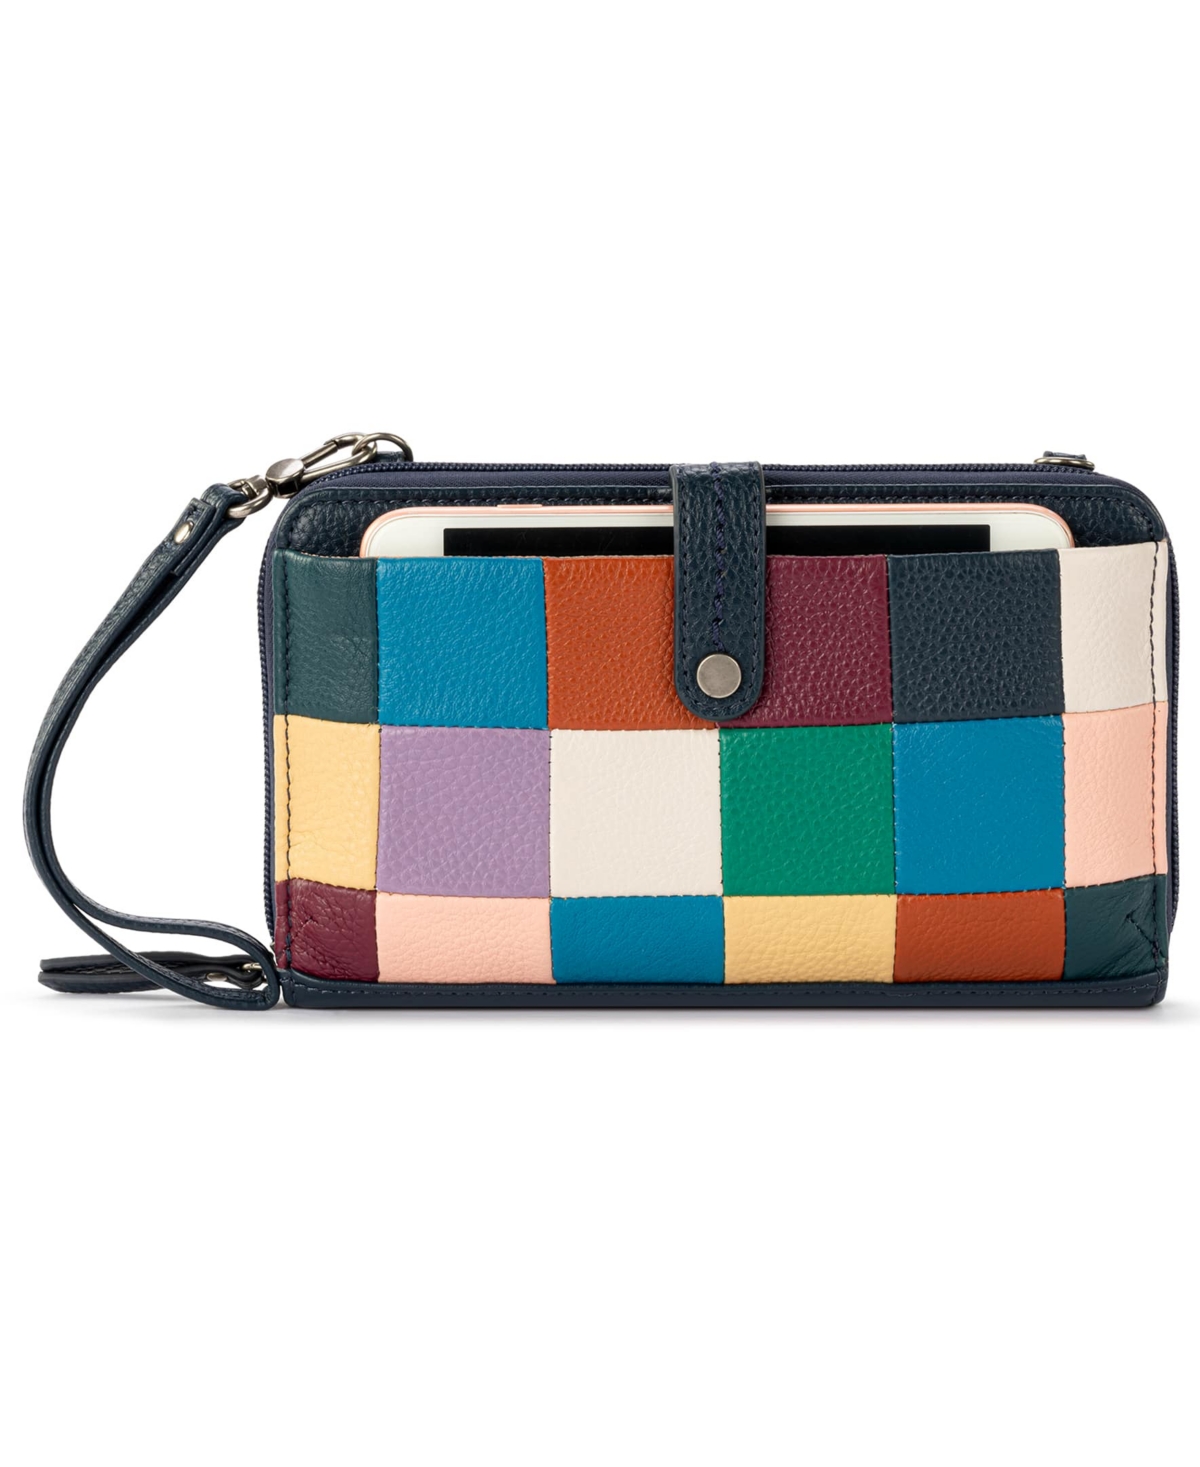 The Sak Iris Leather Smartphone Convertible Crossbody Wallet In Multi Patch